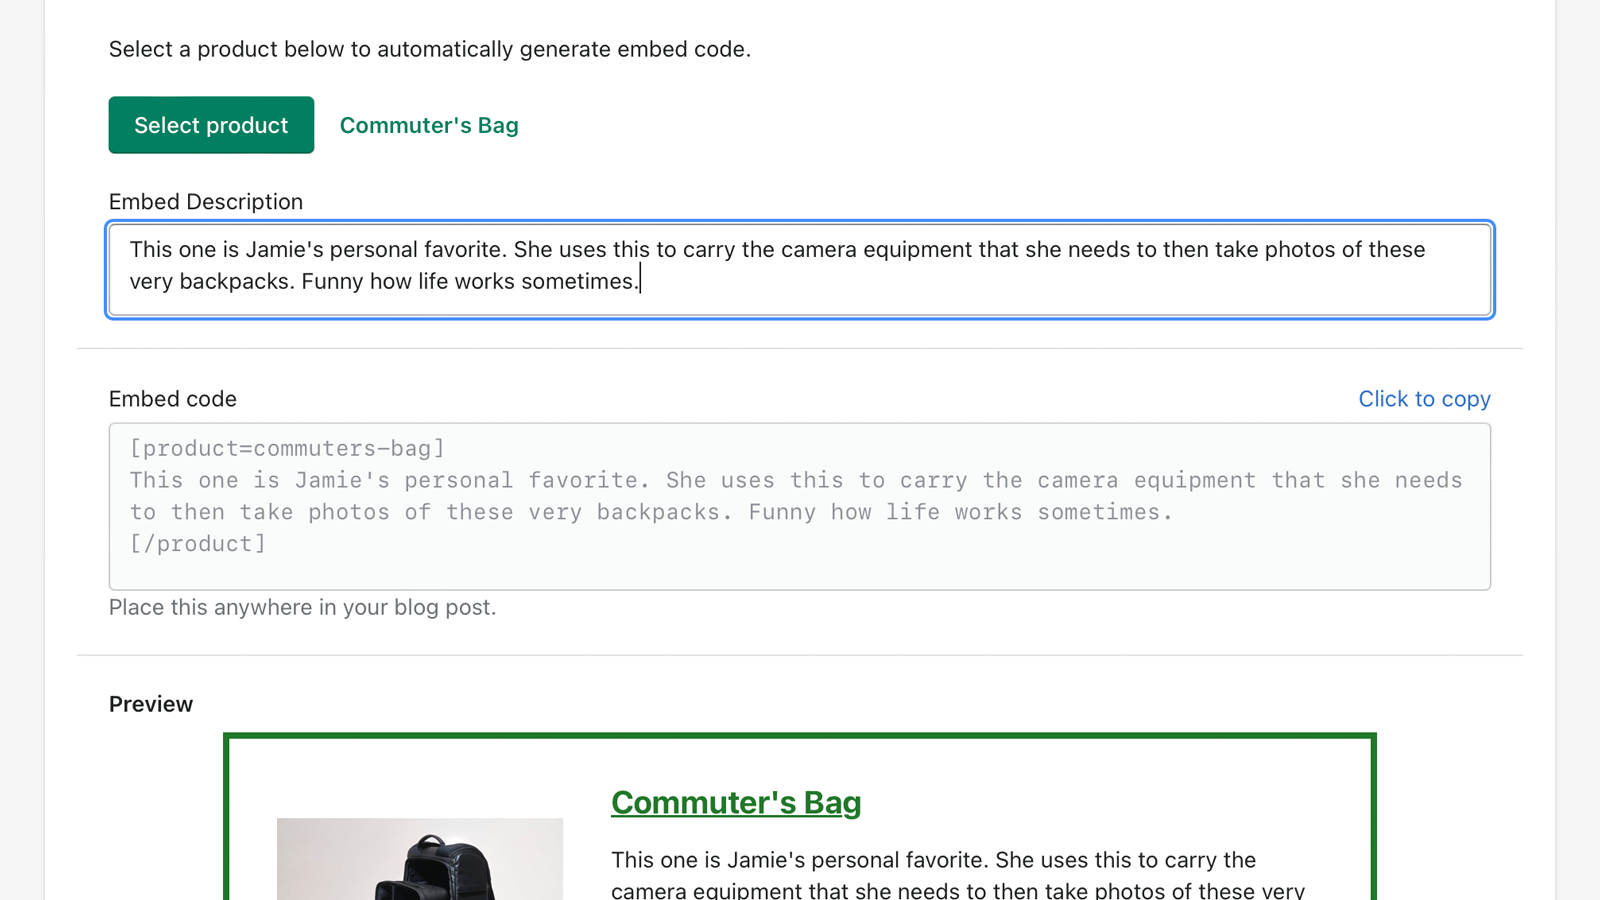 The helper tool lets you copy embed code and preview the embed